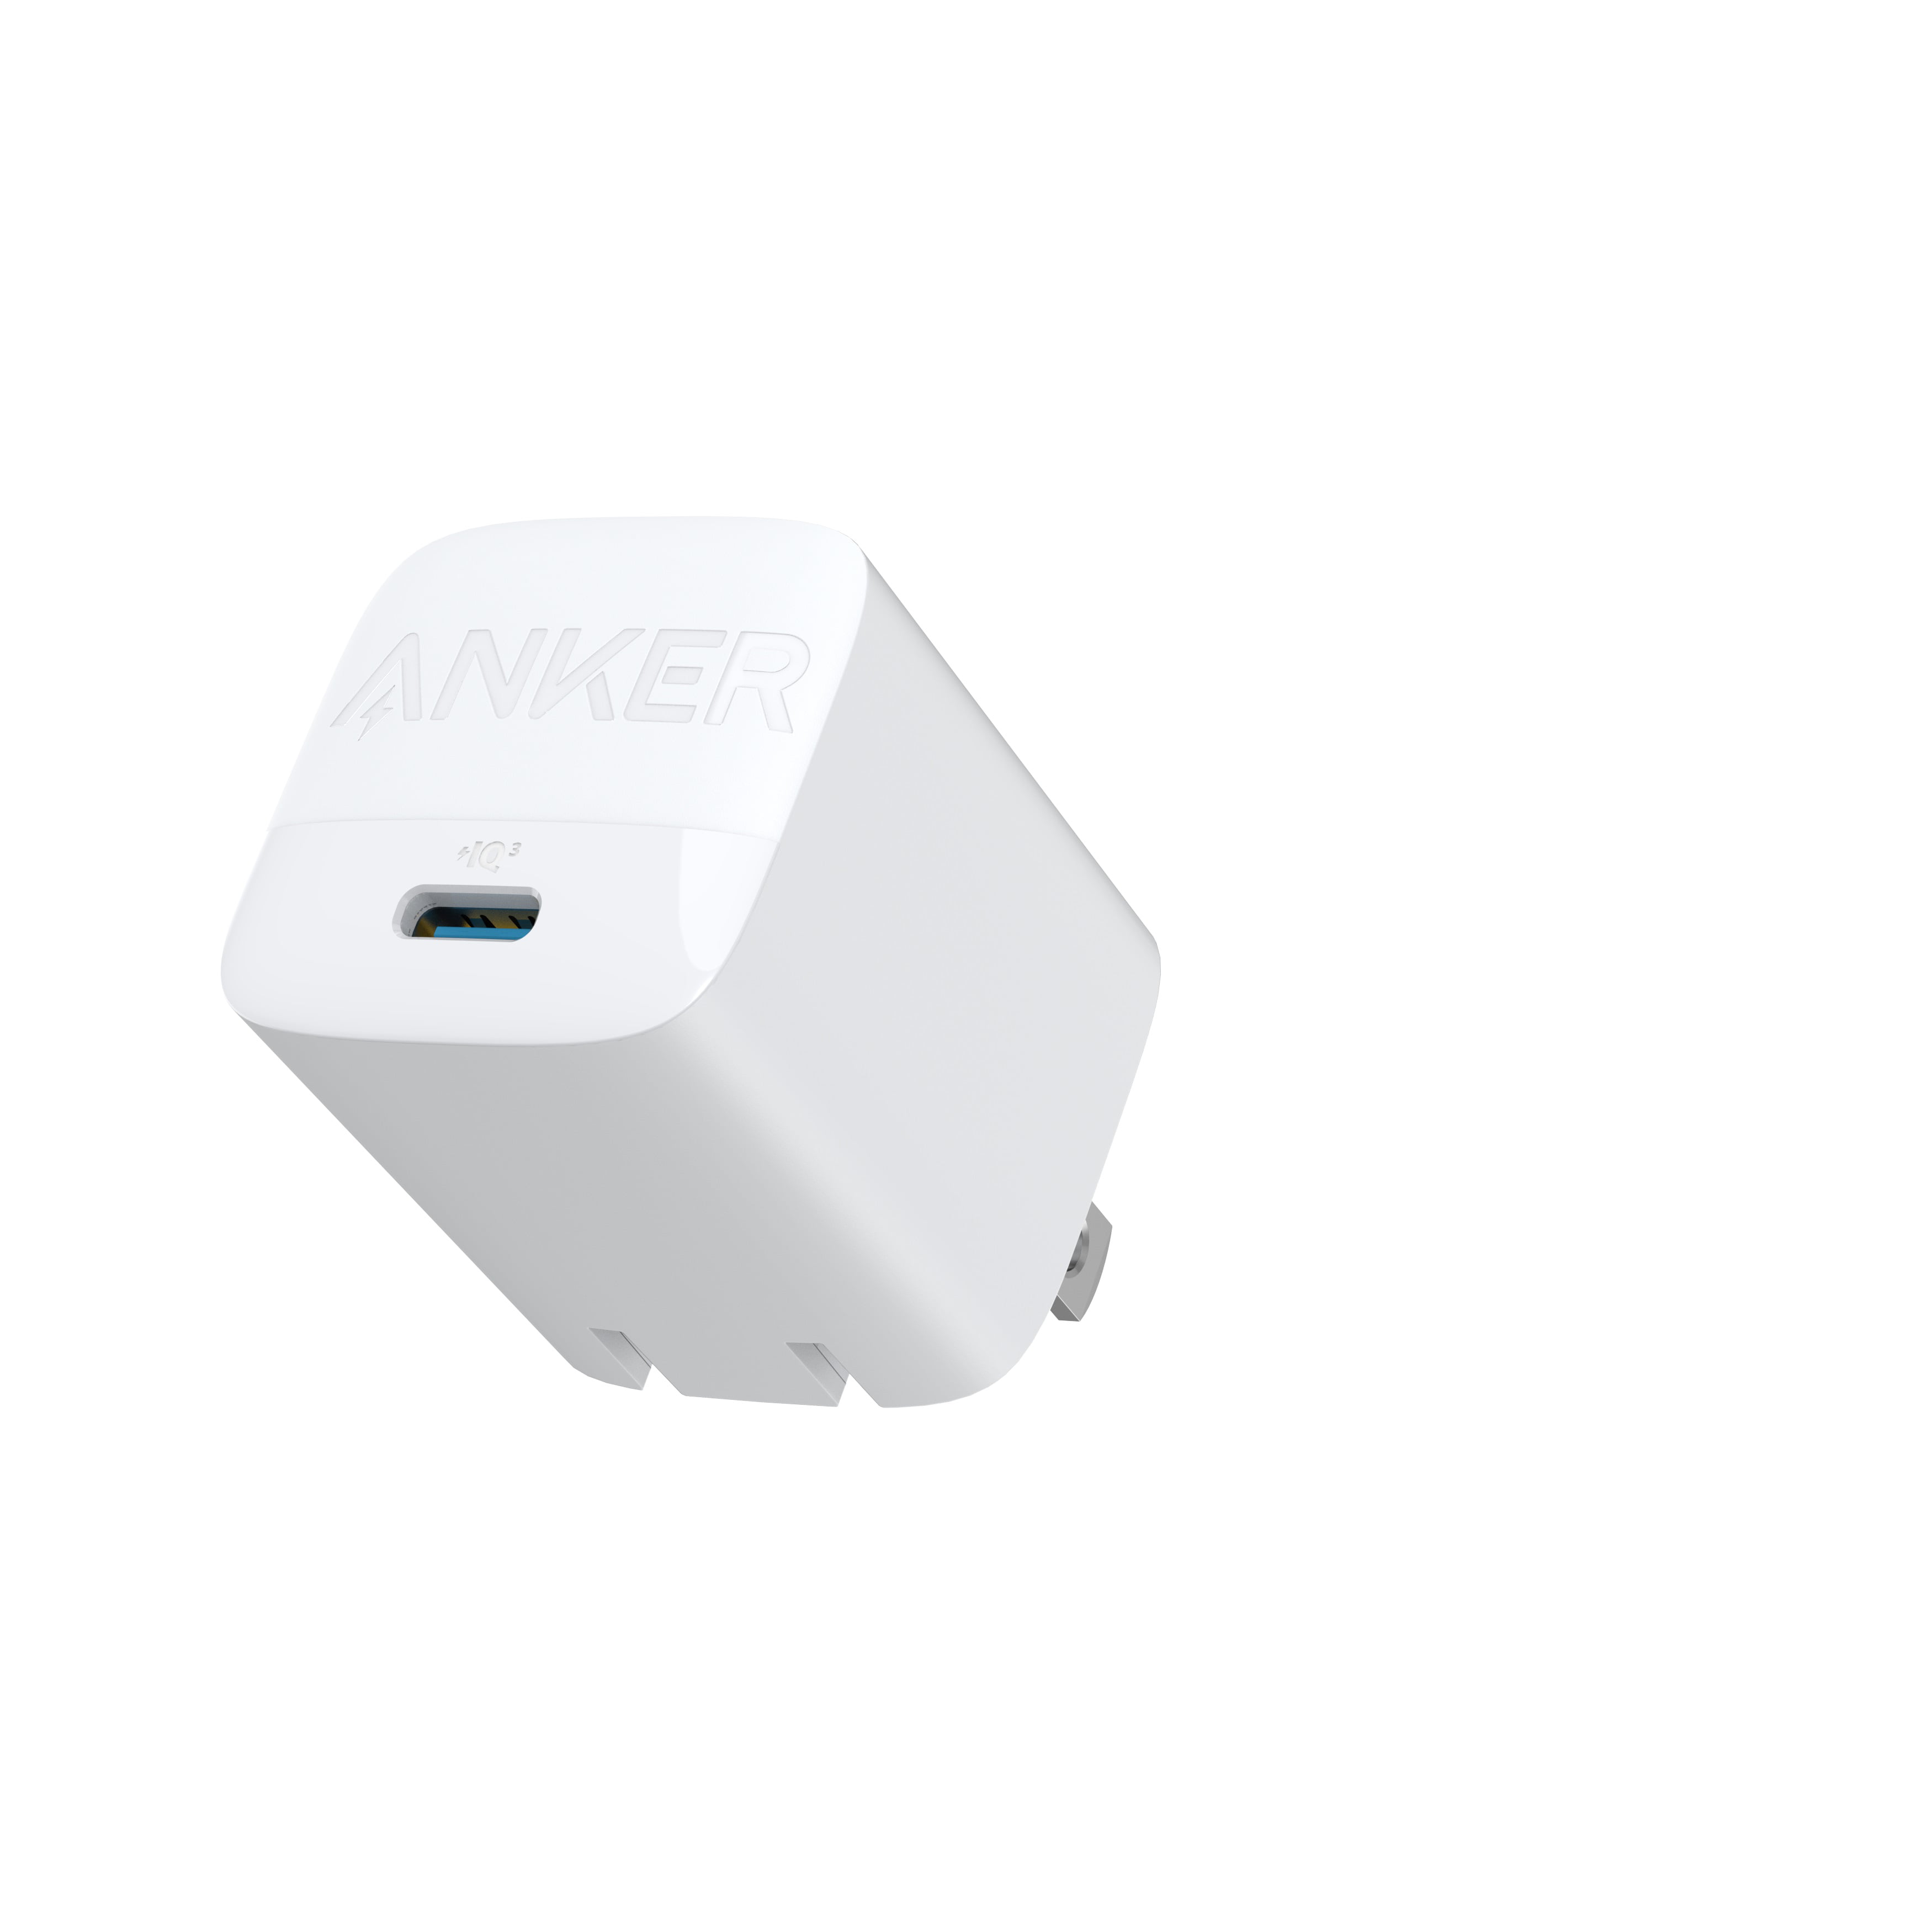 Anker 313 USB-C 30W Wall Charger for MacBook Air/iPhone/Galaxy/iPad Pro, Pixel, and More